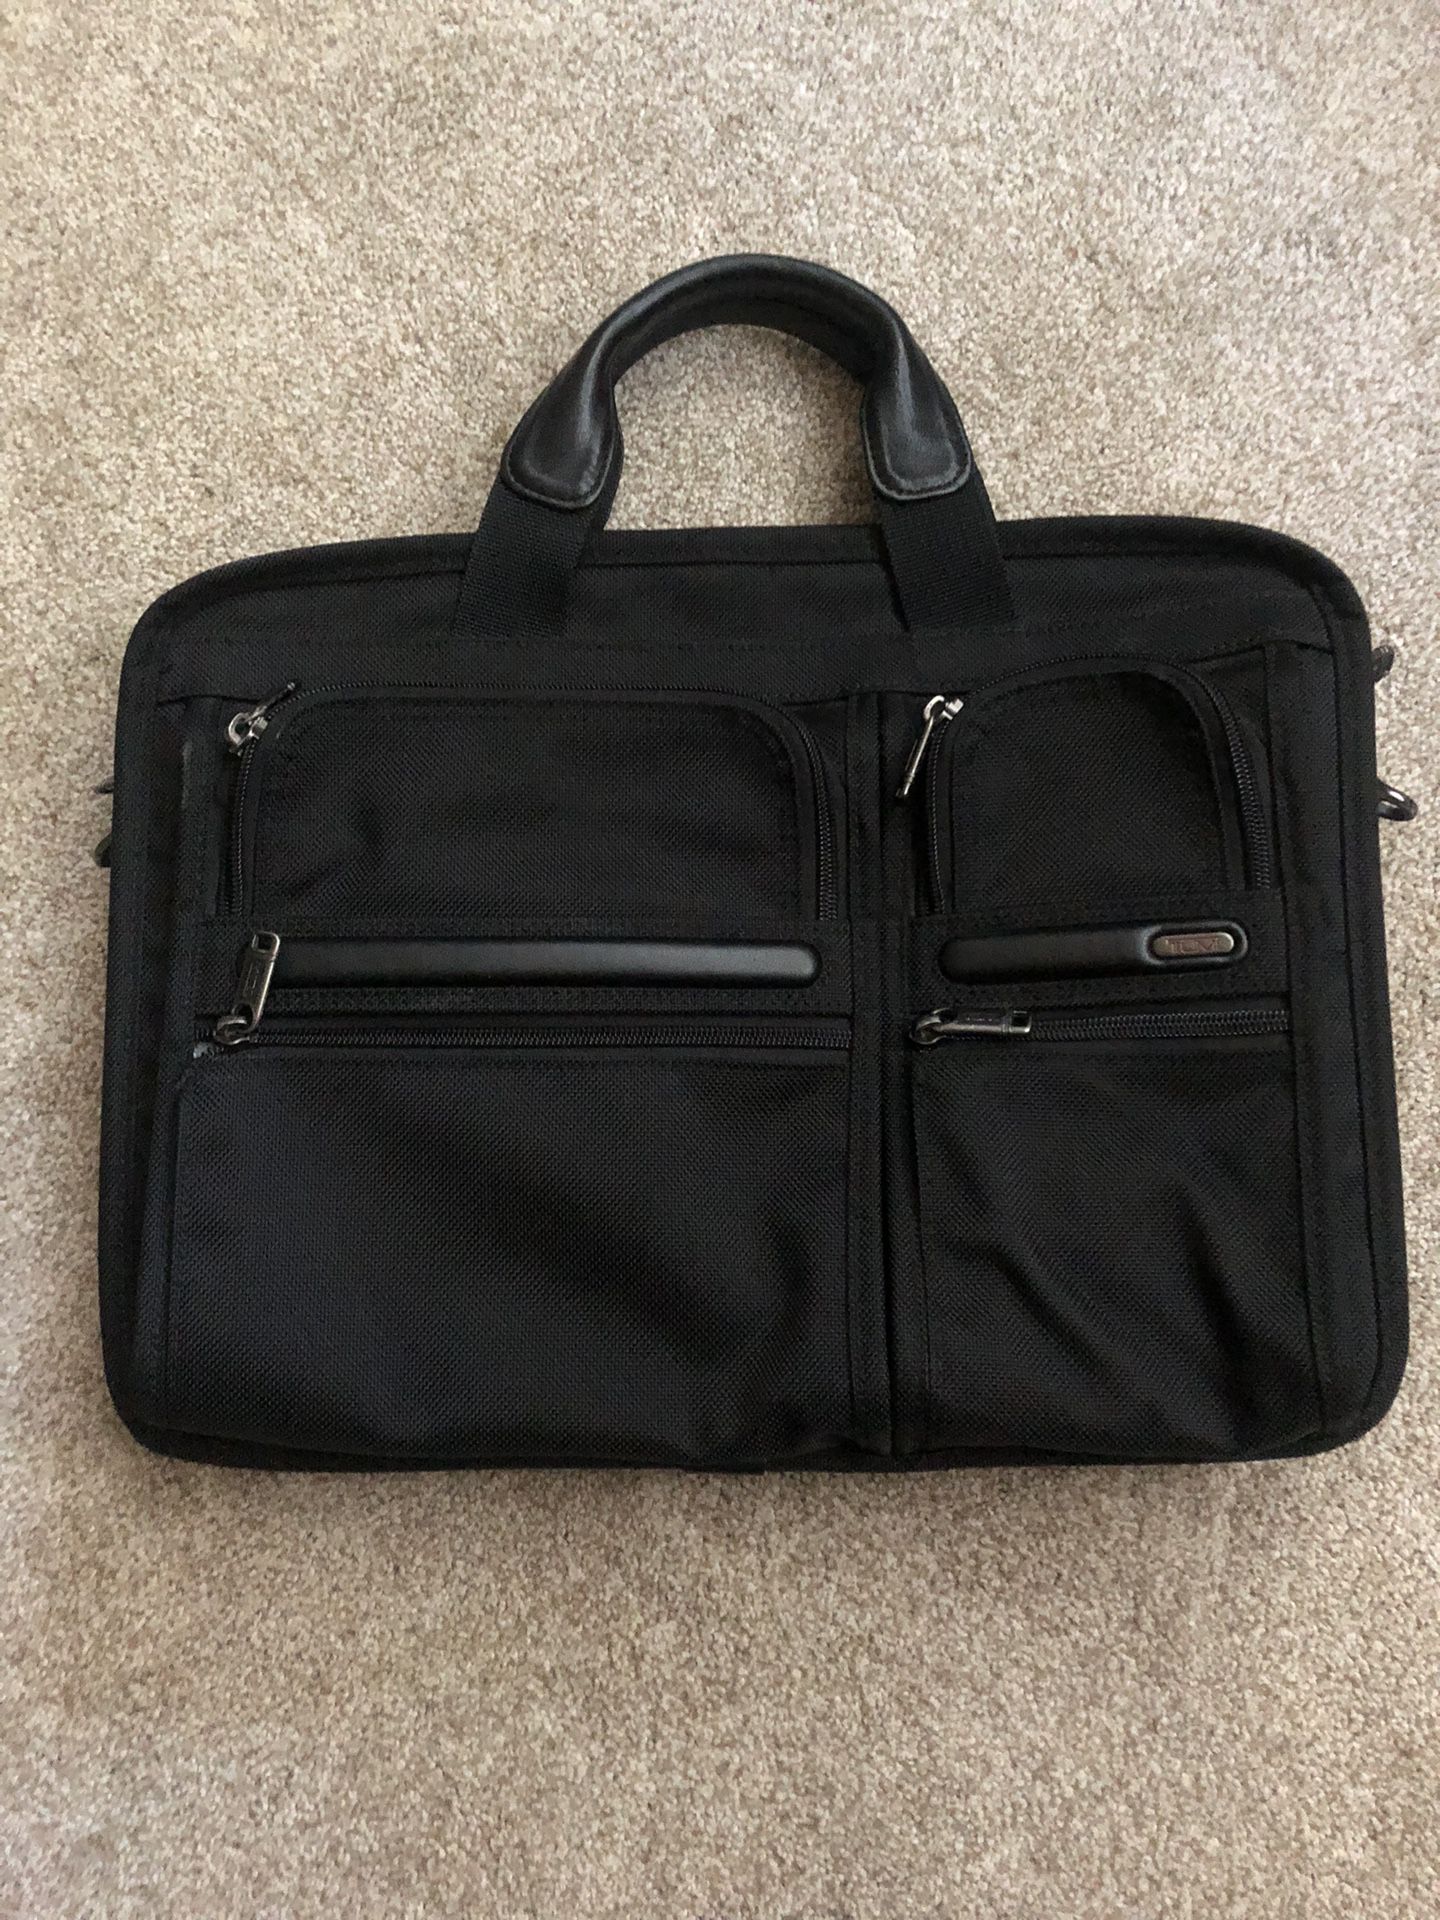 Tumi Alpha II 26516D4 Laptop Case for Sale in Issaquah, WA - OfferUp